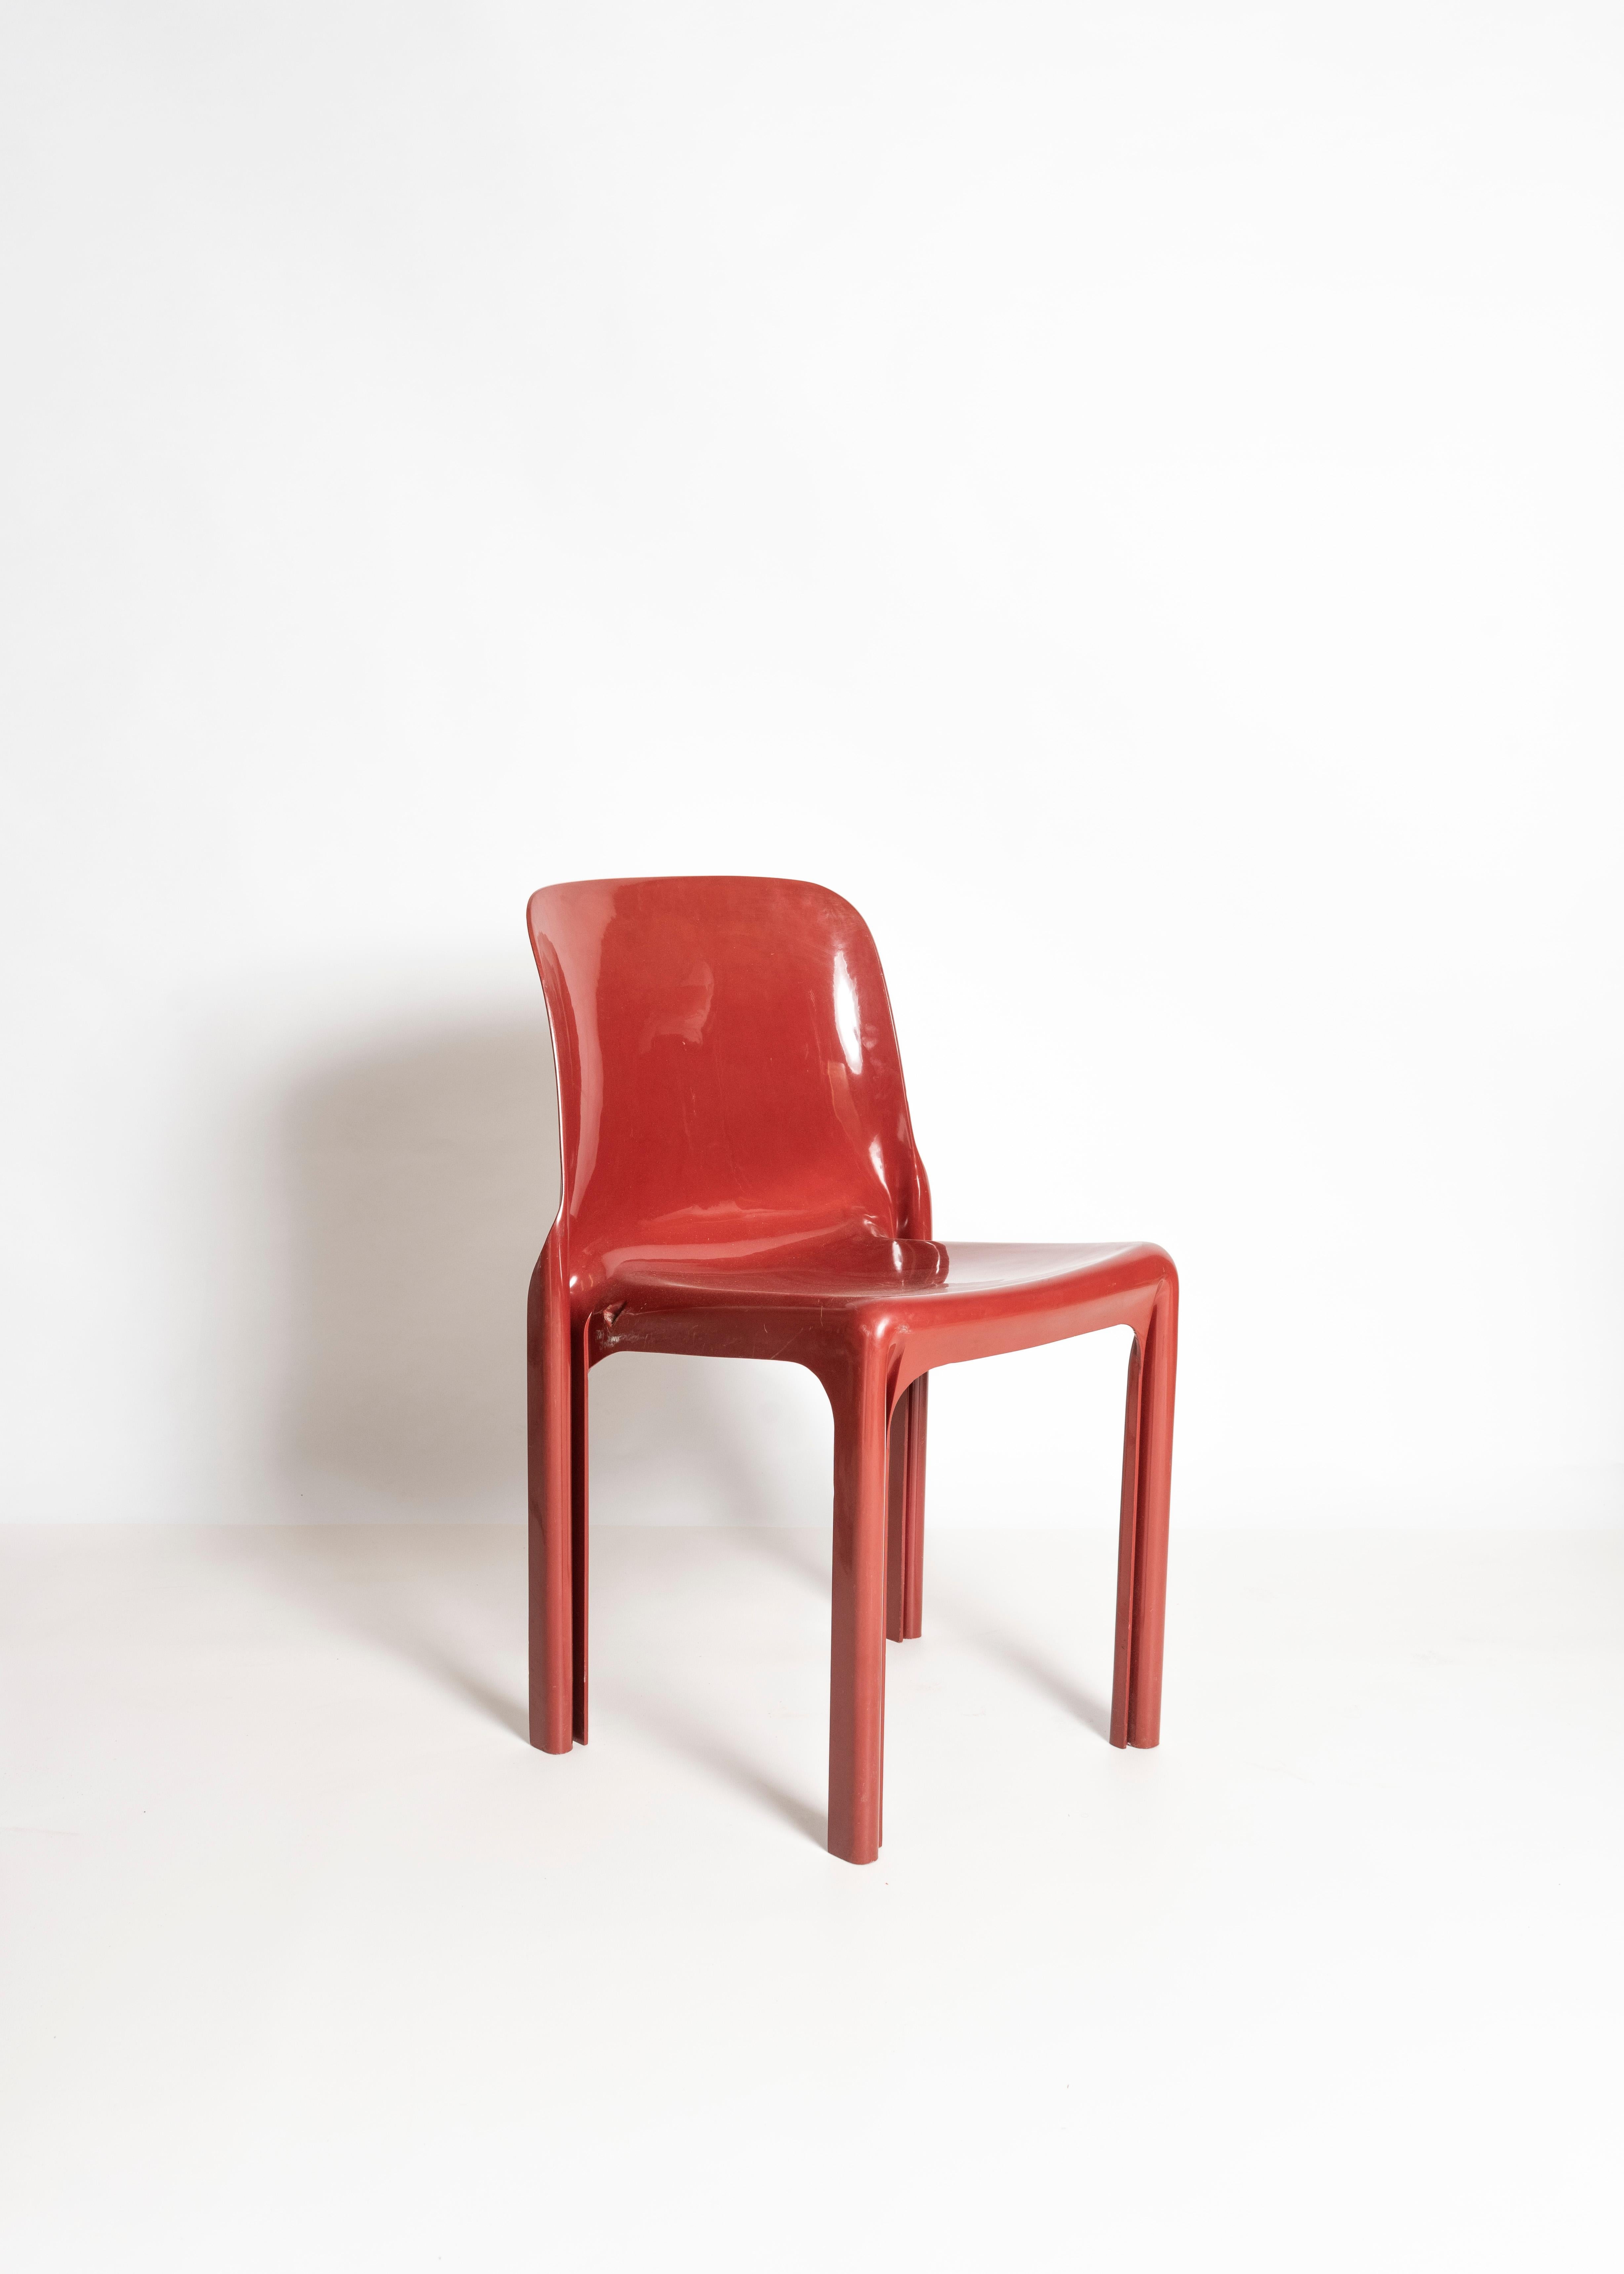 Mid-20th Century Italian Chair by Vico Magistretti for Artemide, Red Selene Chair, Italy, 1960s For Sale